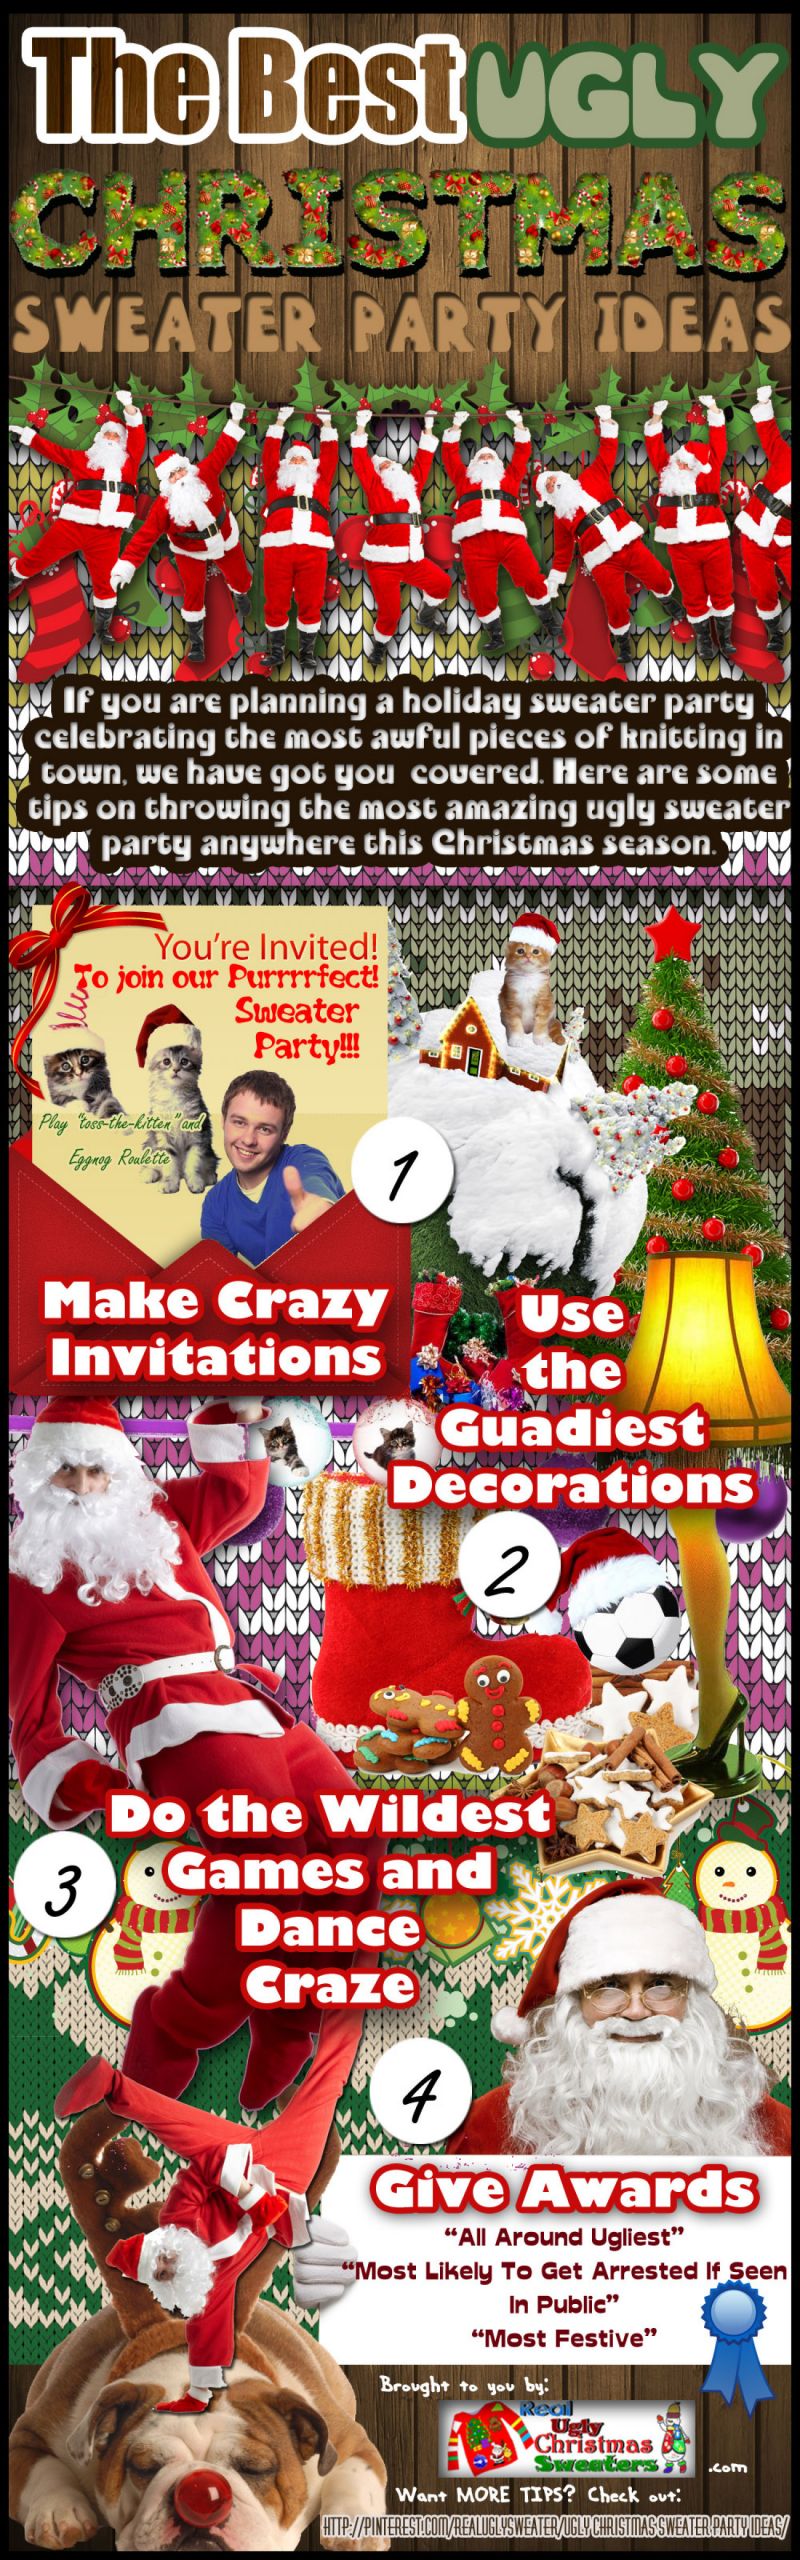 Best Ugly Christmas Sweater Party Ideas
 The Best Ugly Christmas Sweater Party Ideas